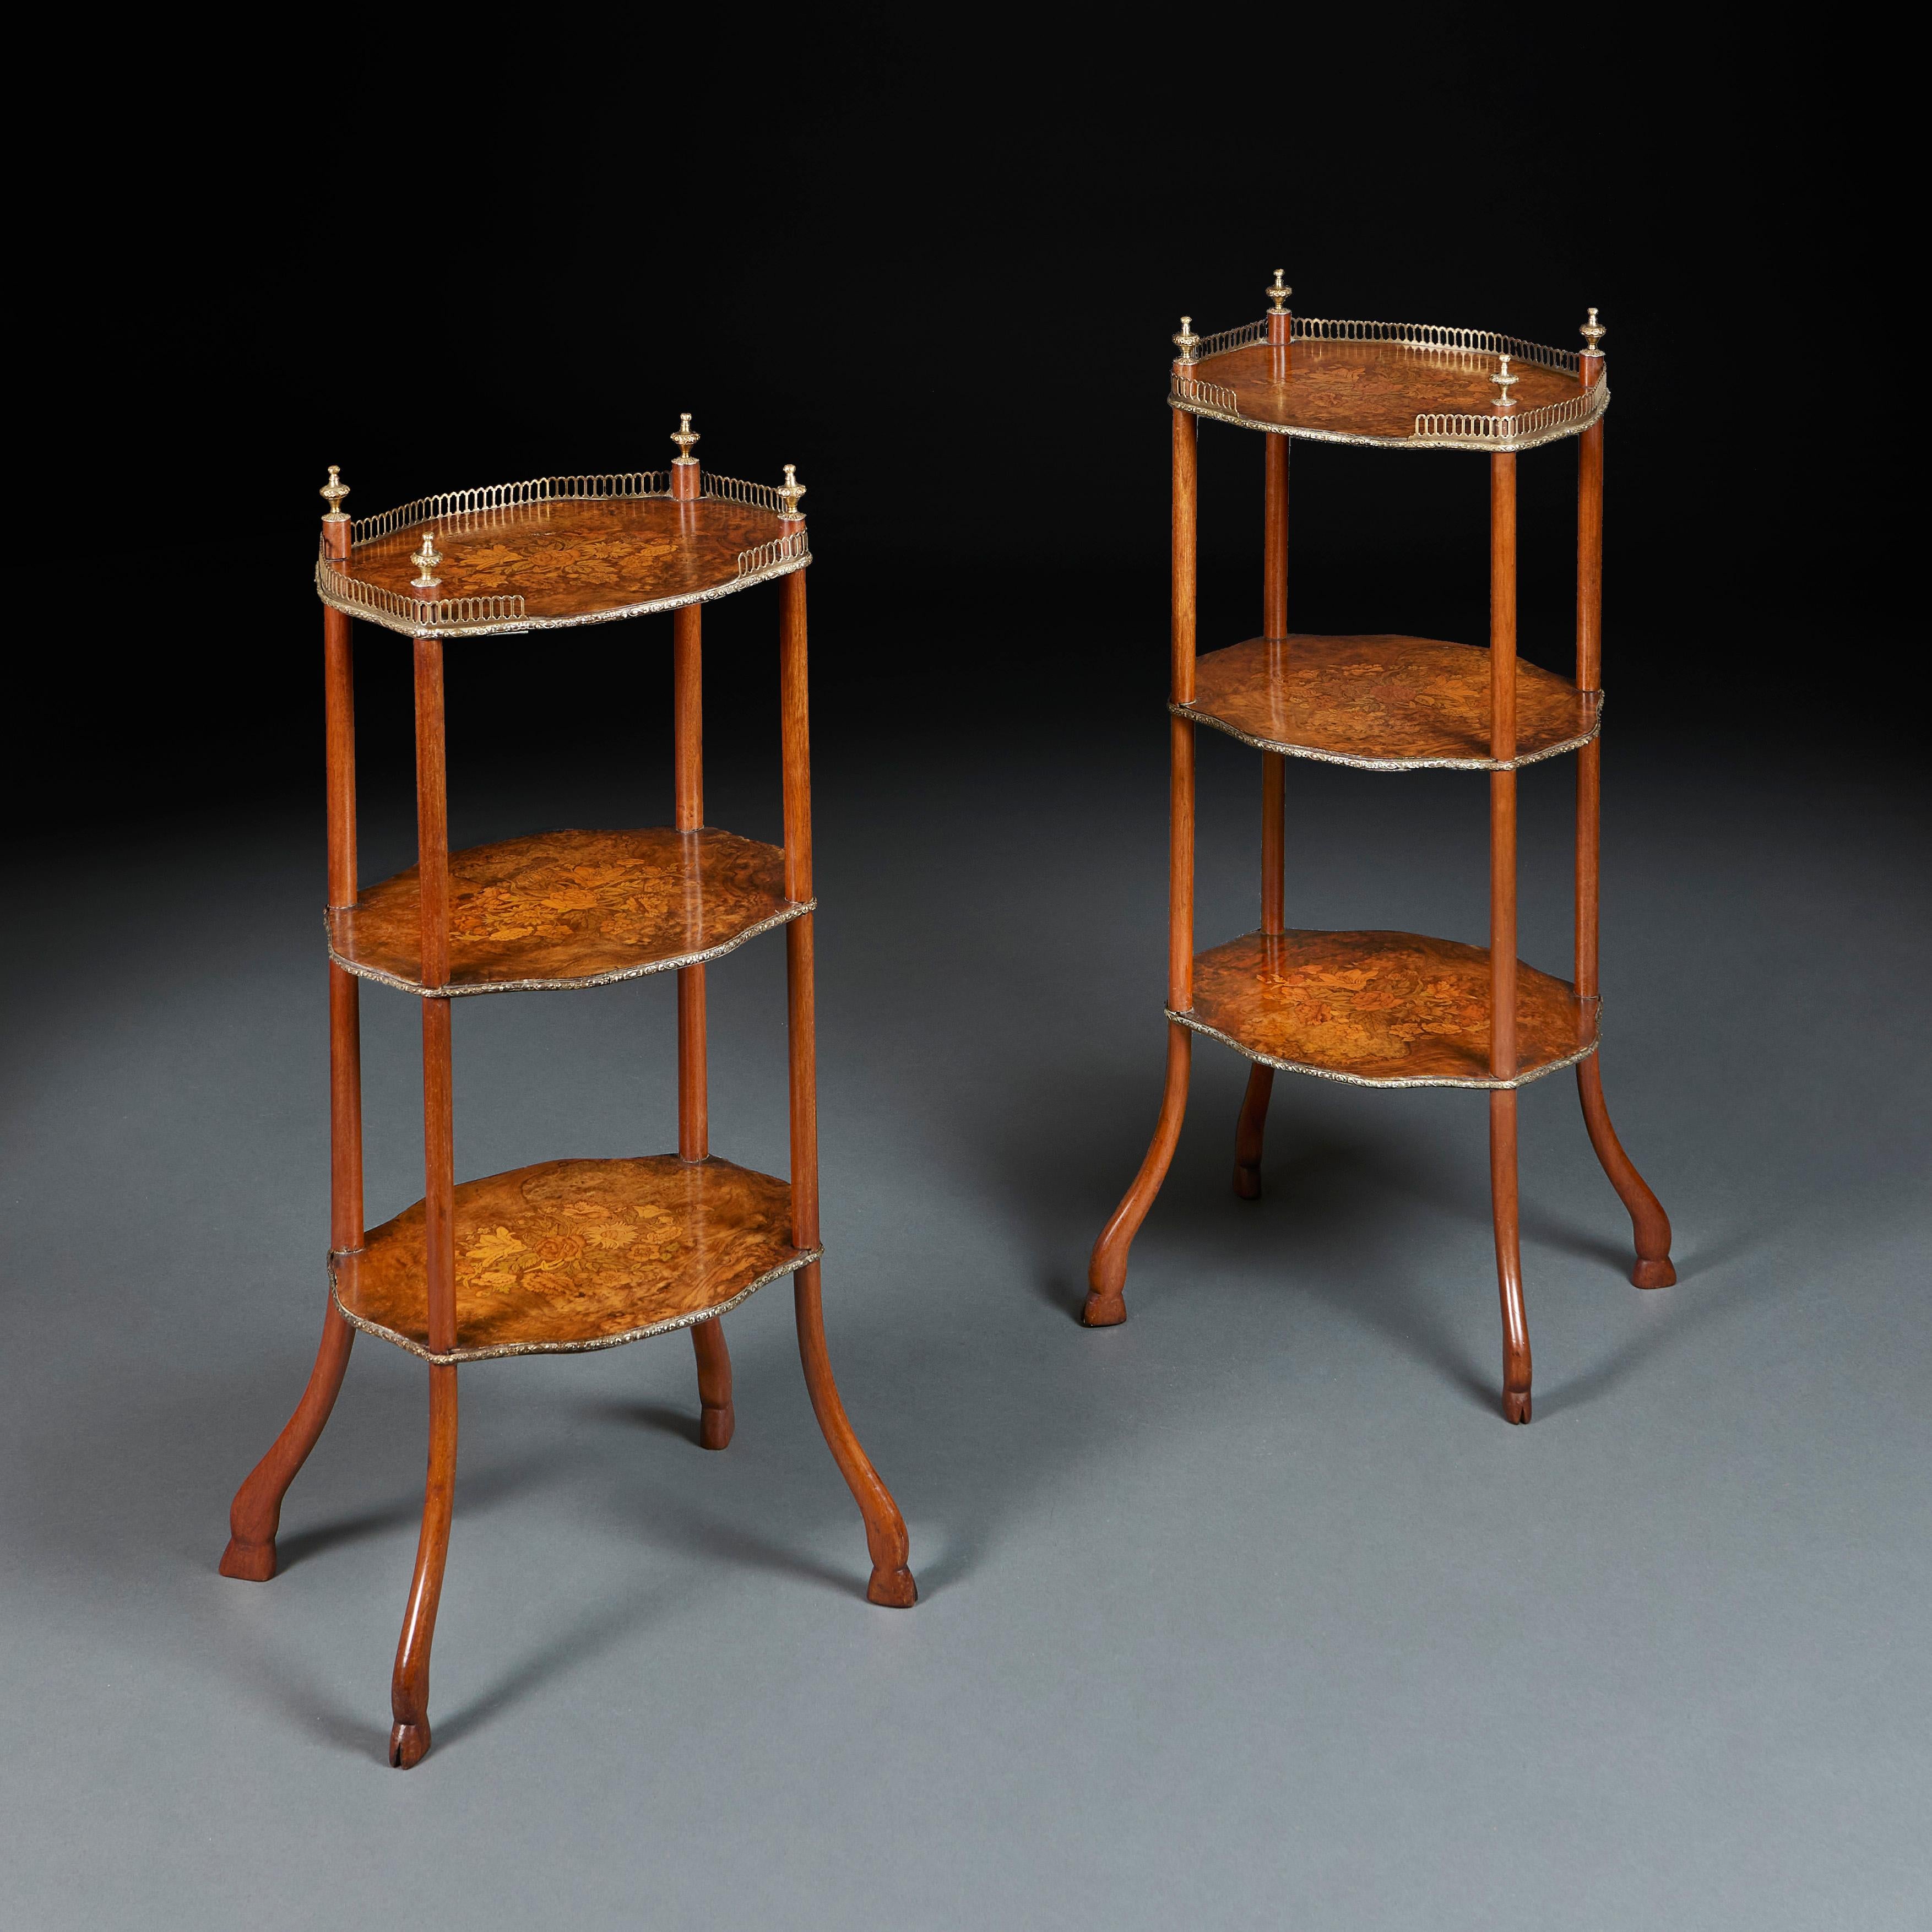 England, circa 1850

A fine pair of mid nineteenth century three tier etageres with marquetry tops showing sprays of flowers, with brass galleries, the uprights surmounted by brass acorn finials, and terminating in splayed legs and hoof